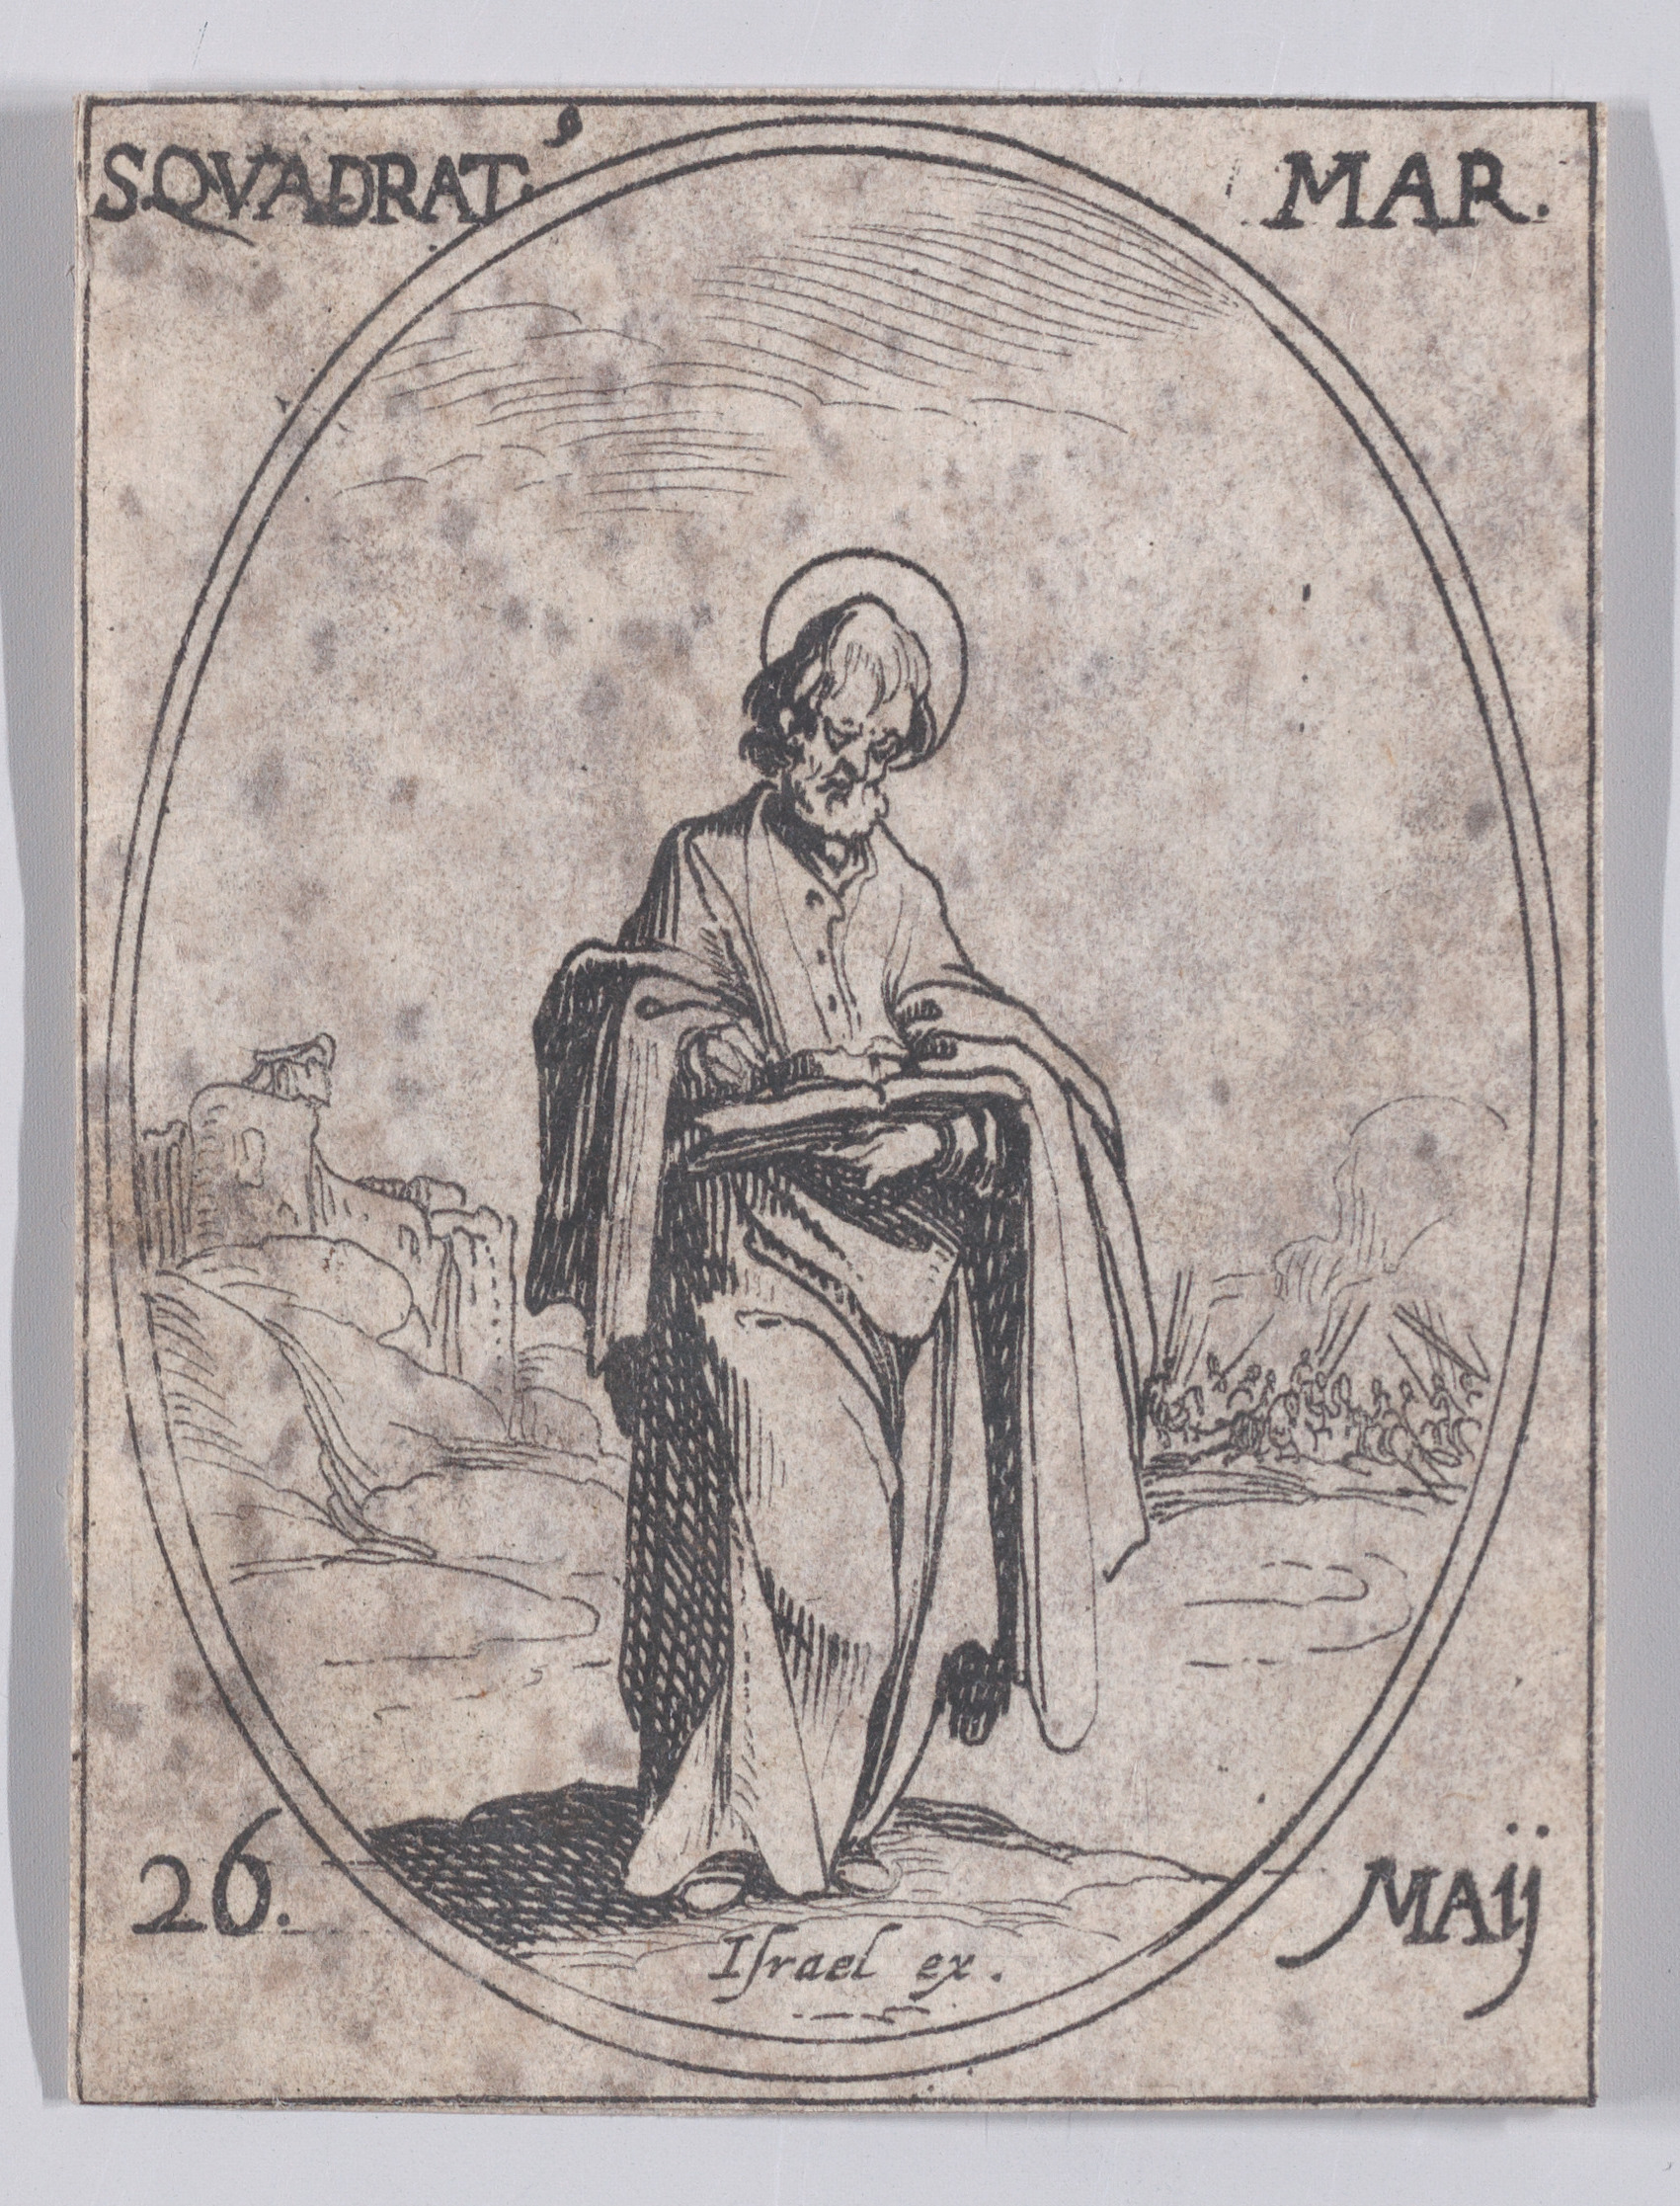 S. Quadrat, martyr (St. Quadratus, Martyr), May 26th, from Les Images De Tous Les Saincts et Saintes de L'Année (Images of All of the Saints and Religious Events of the Year), Jacques Callot (French, Nancy 1592–1635 Nancy), Etching; second state of two (Lieure)